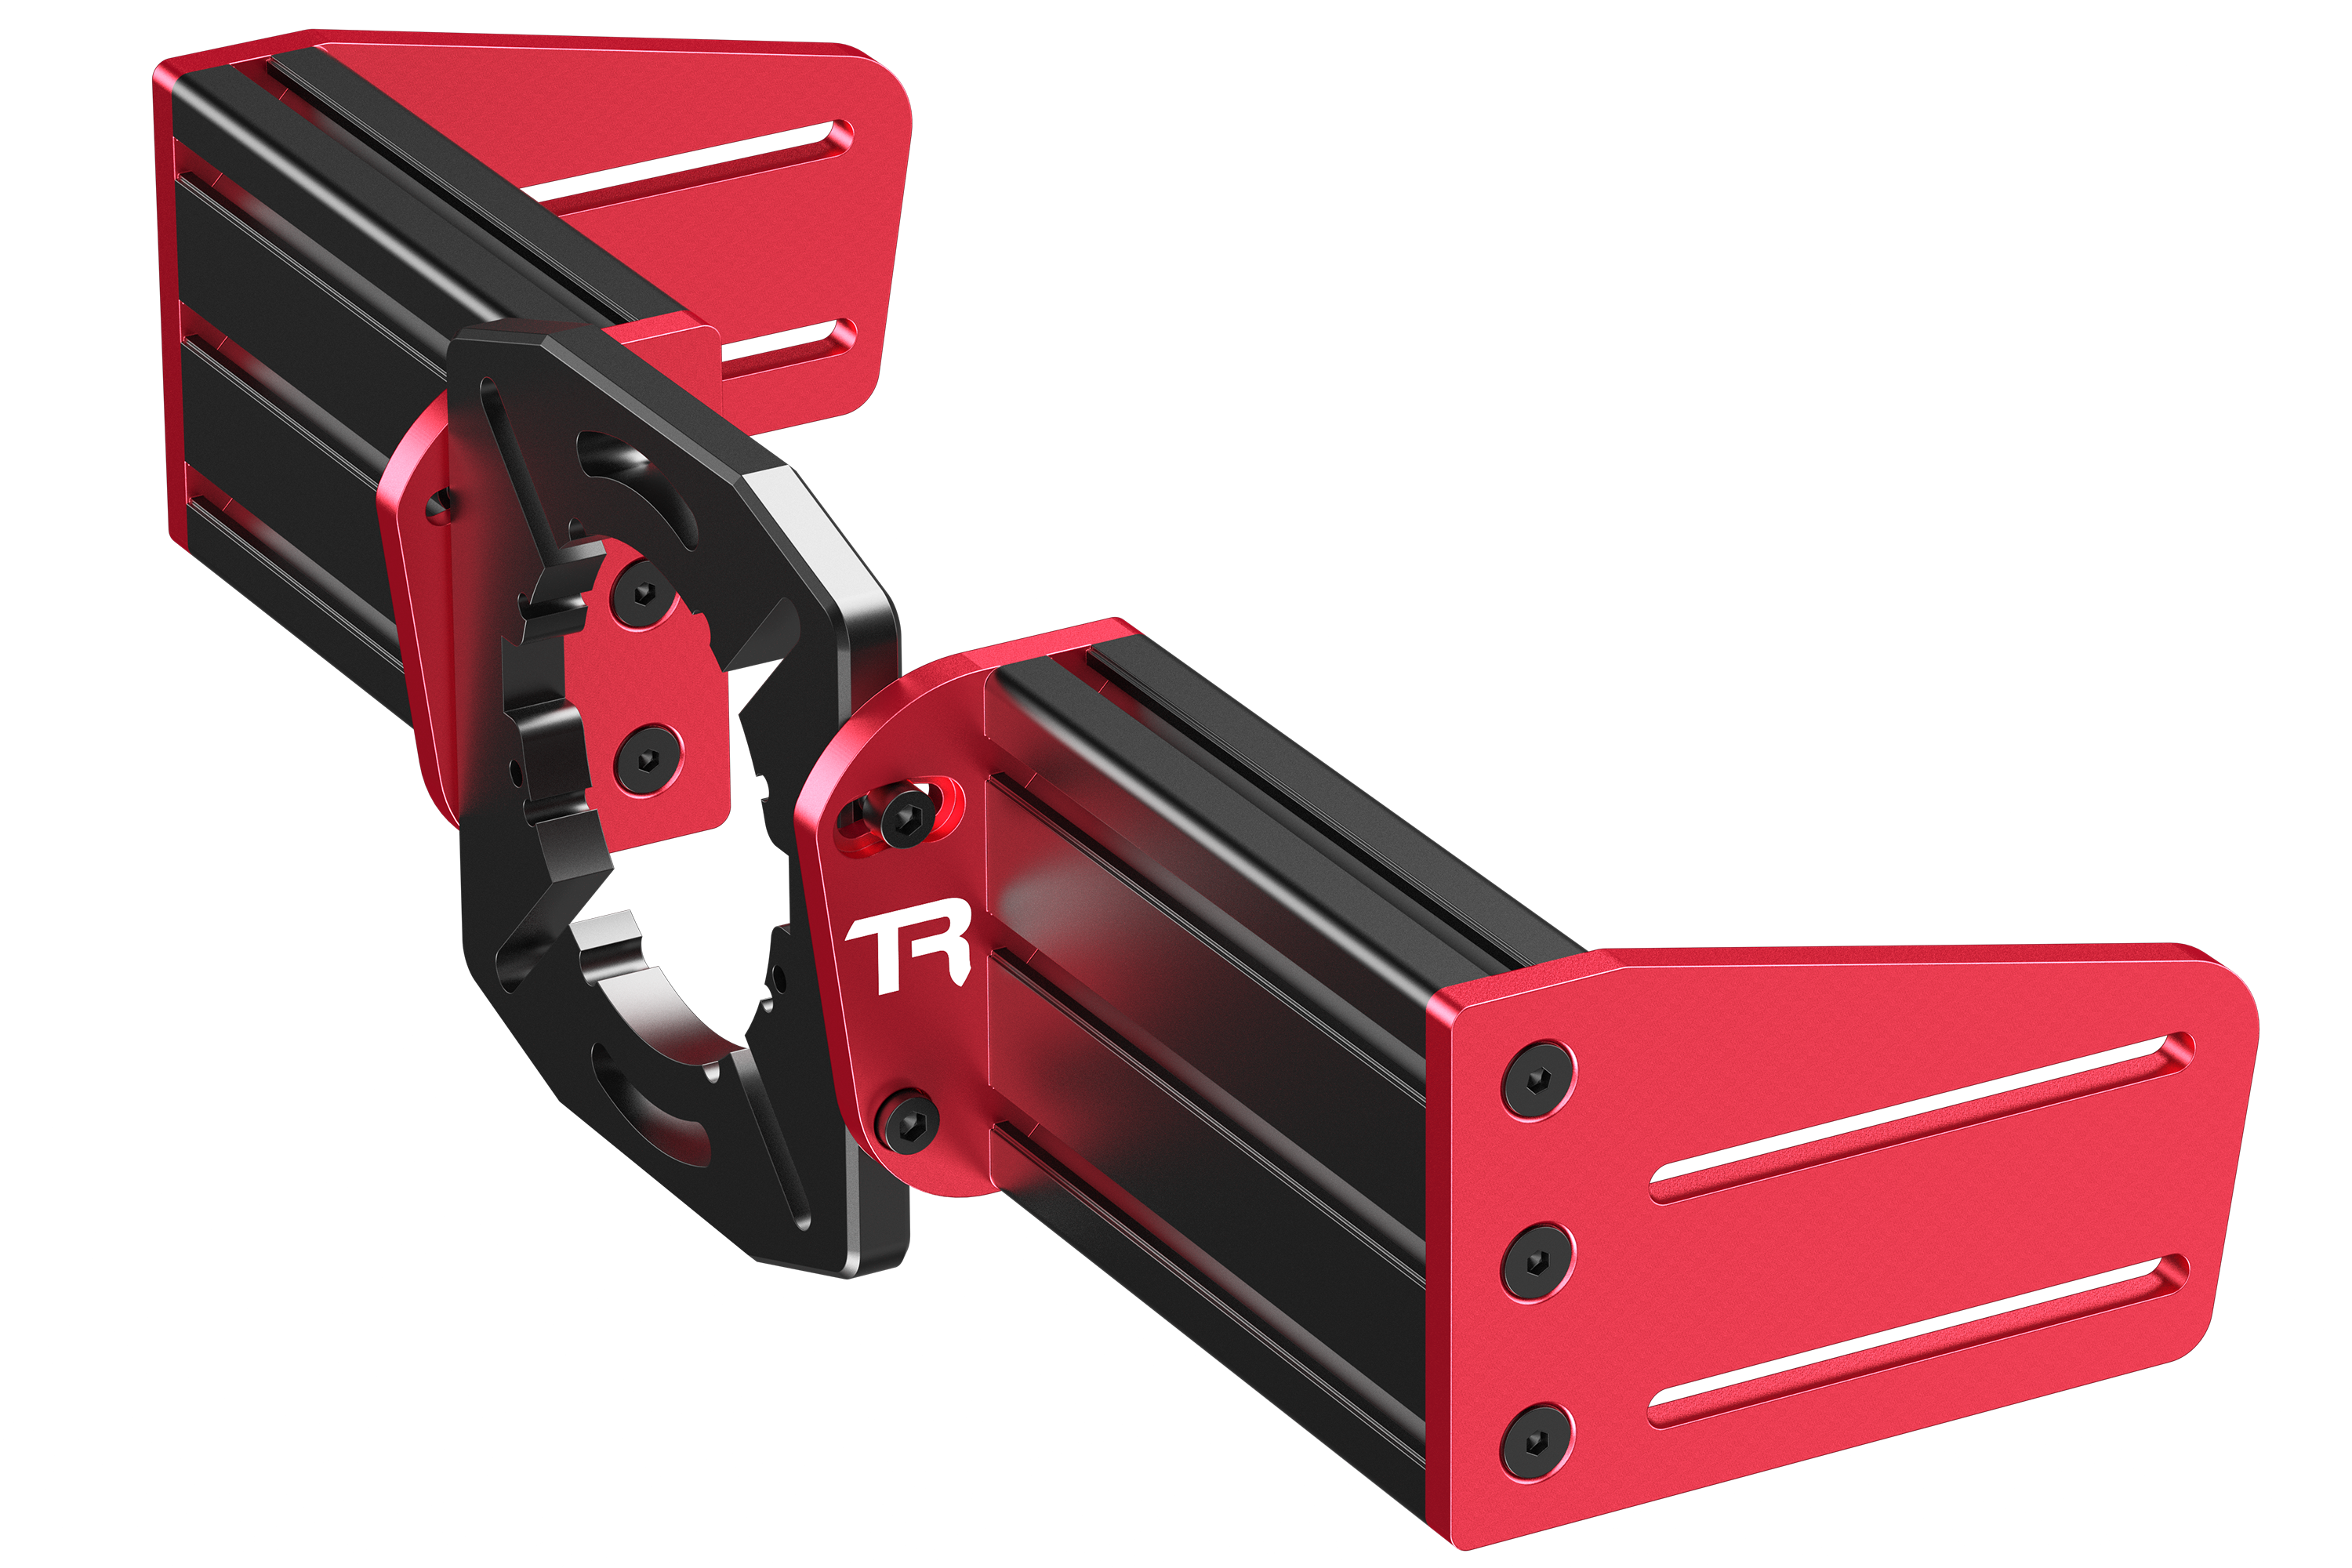 TR-One Fully Adjustable Direct Fit Wheel Mount for Simucube, VRS, Accuforce, OSW, Mige etc